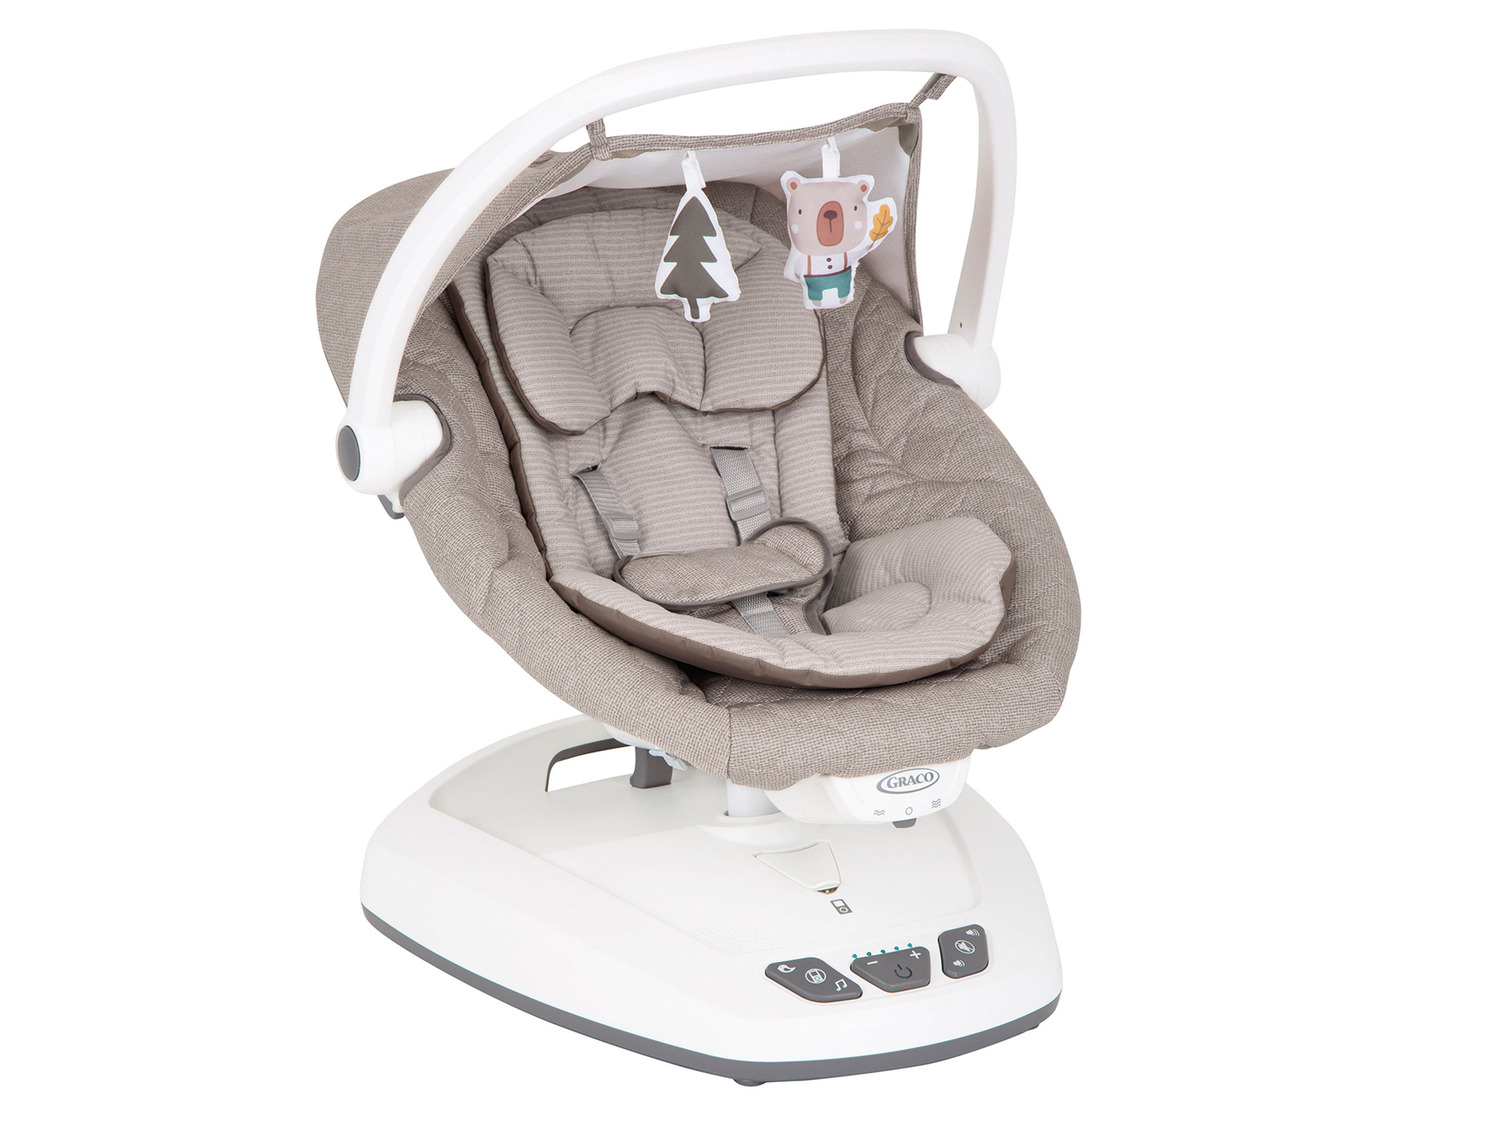 Graco Babyschaukel »Move with Me®«, faltbar | LIDL